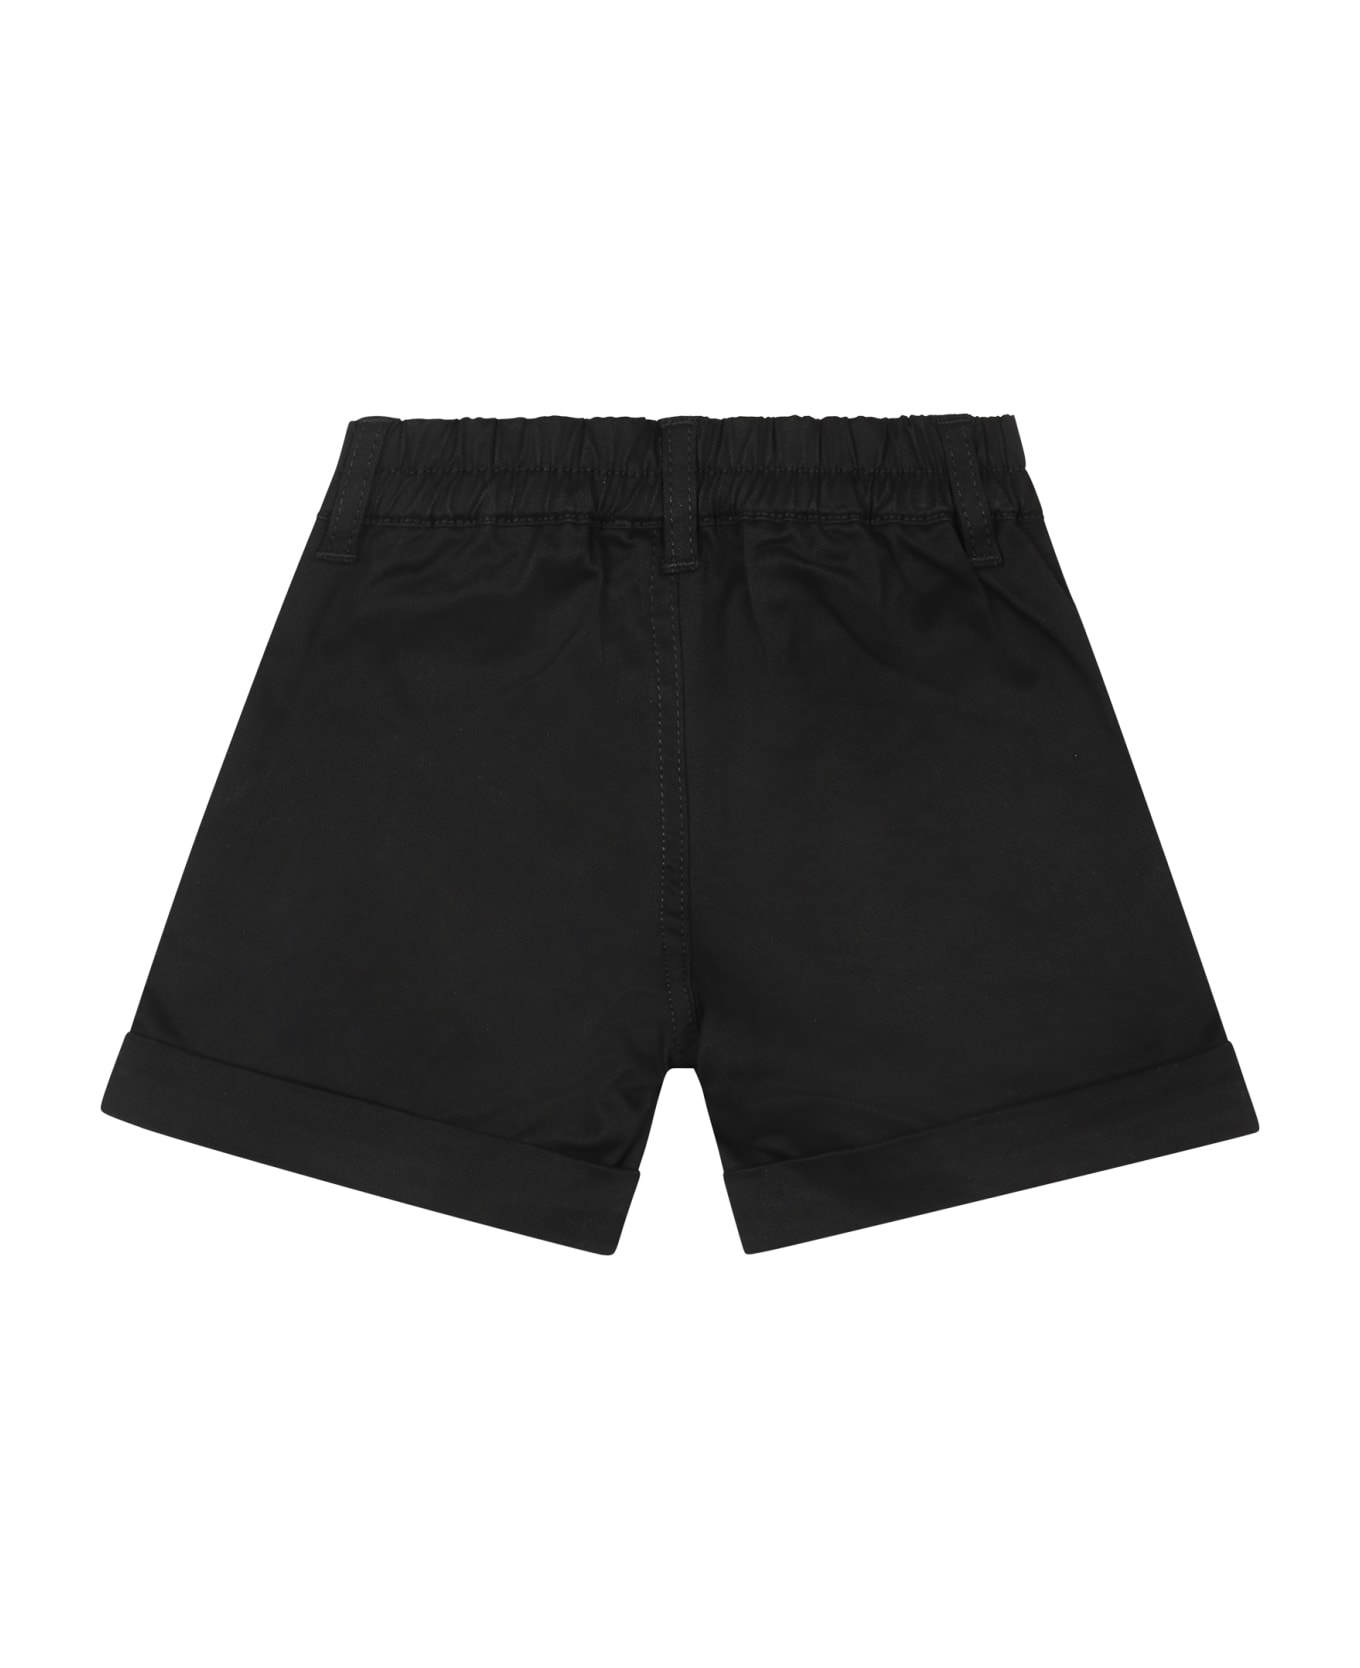 Moschino Black Shorts For Baby Boy With Teddy Bear And Logo - Black